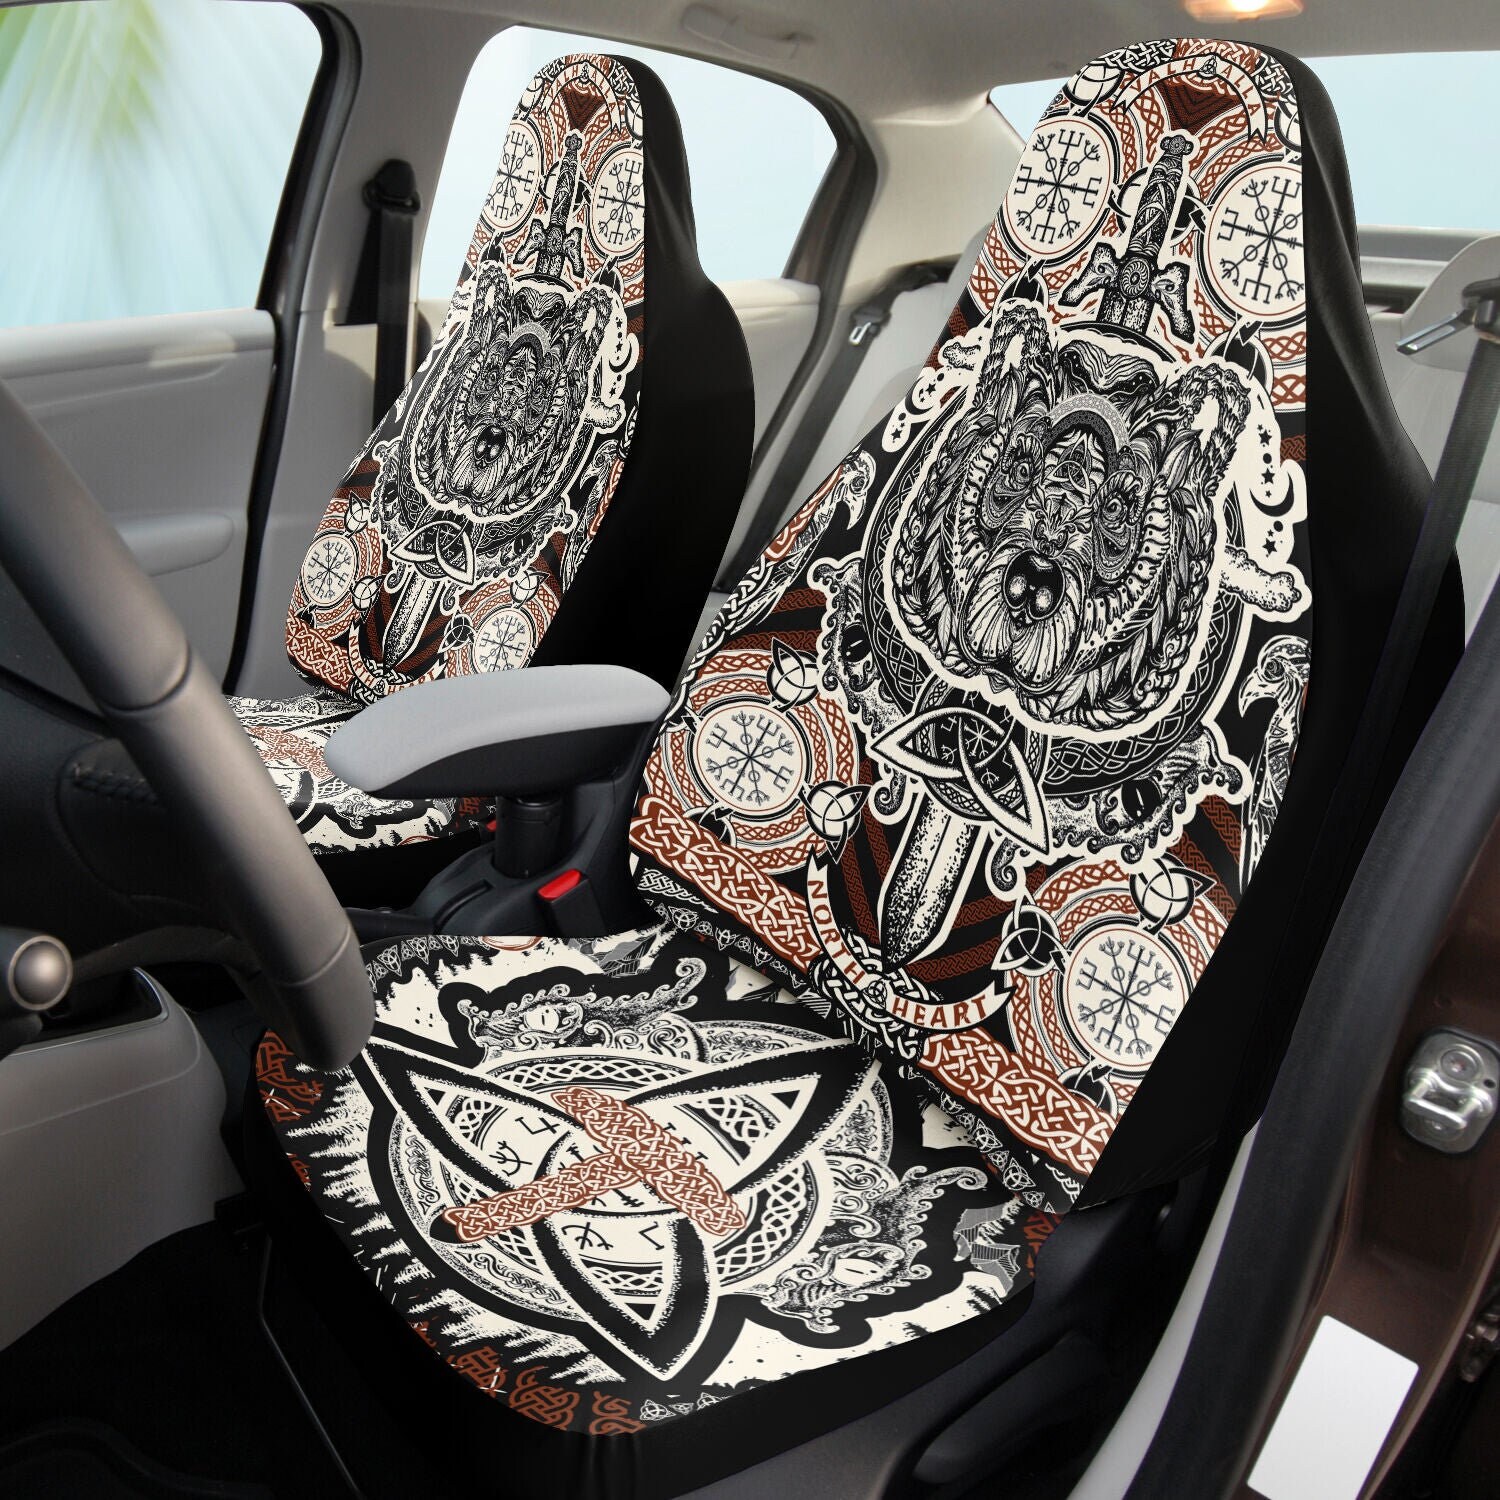 Upgrade Car Interior A Universal Fit 5 Seat Polyester Car Seat Cover Set, 24/7 Customer Service